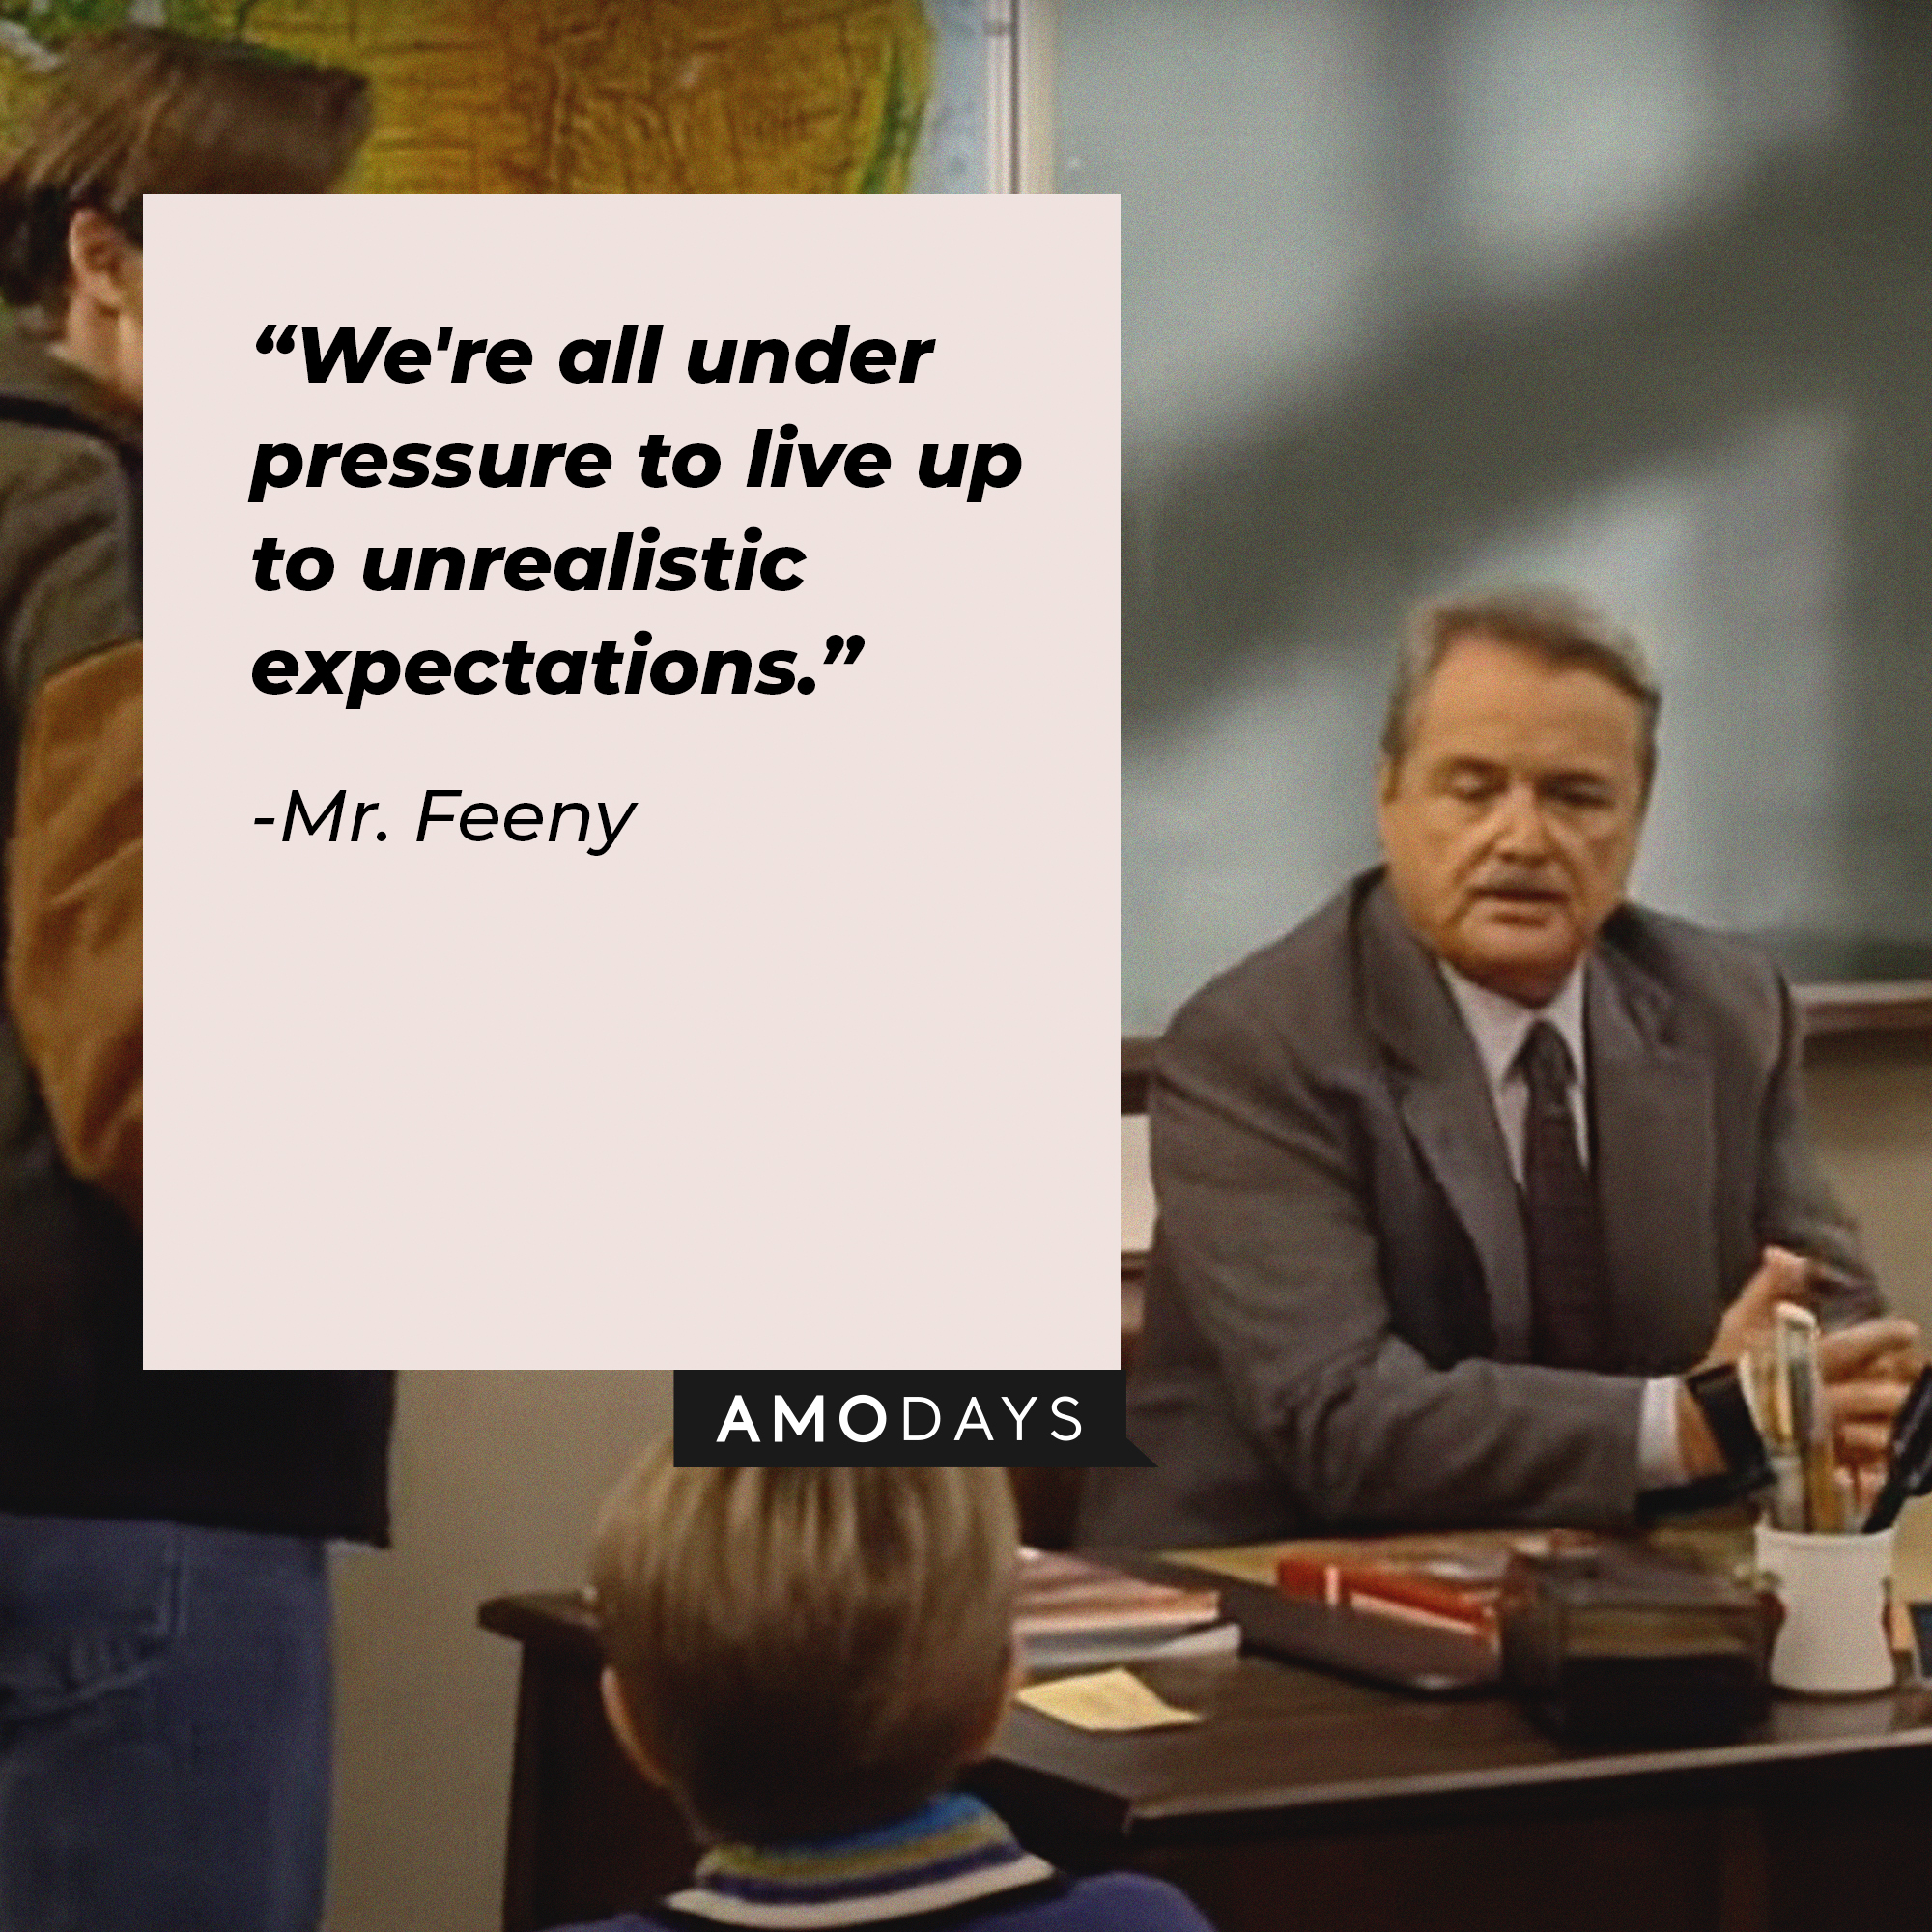 An image of Mr. Feeny with his quote: “We're all under pressure to live up to unrealistic expectations.” | Source: facebook.com/BoyMeetsWorldSeries